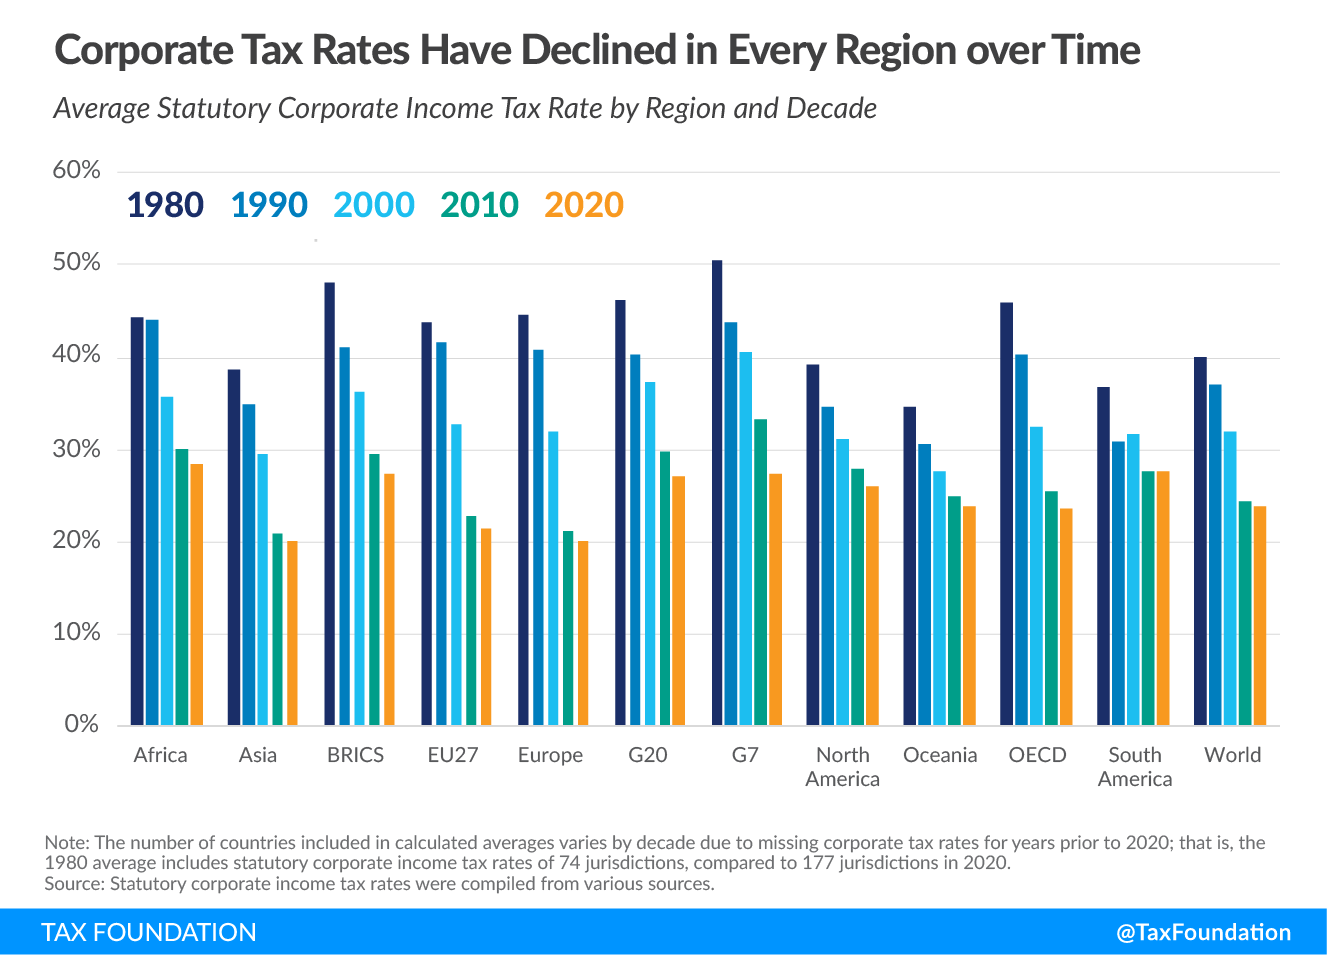 Corporate-Tax-Rates-Have-Declined-in-Every-Region-Around-the-World-Over-Time-2020-Corporate-Tax-Rates-around-the-World.png